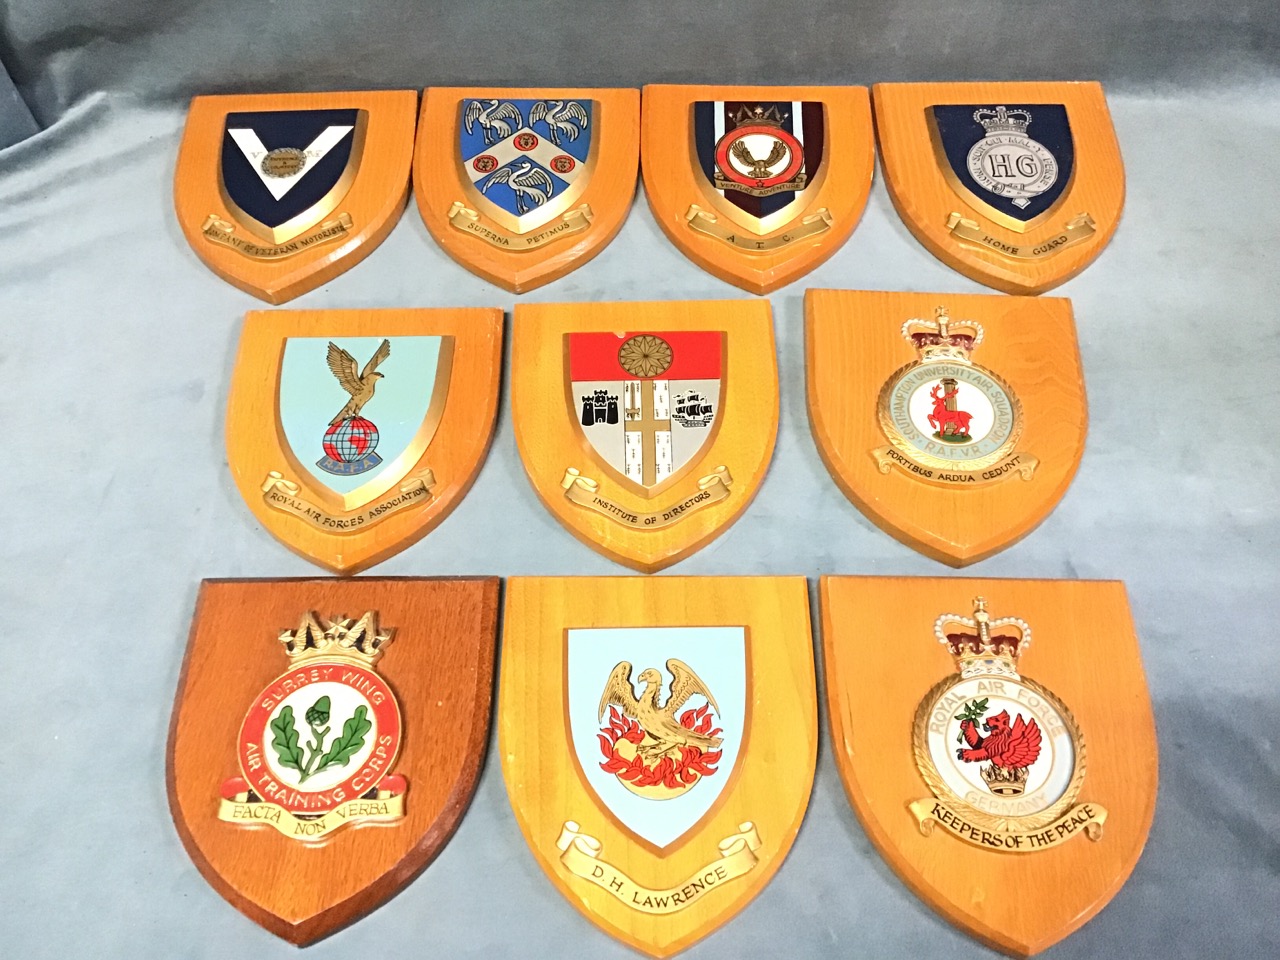 Miscellaneous military and civil armorial shields - Home Guard, RAF College Cranwell, Air Training